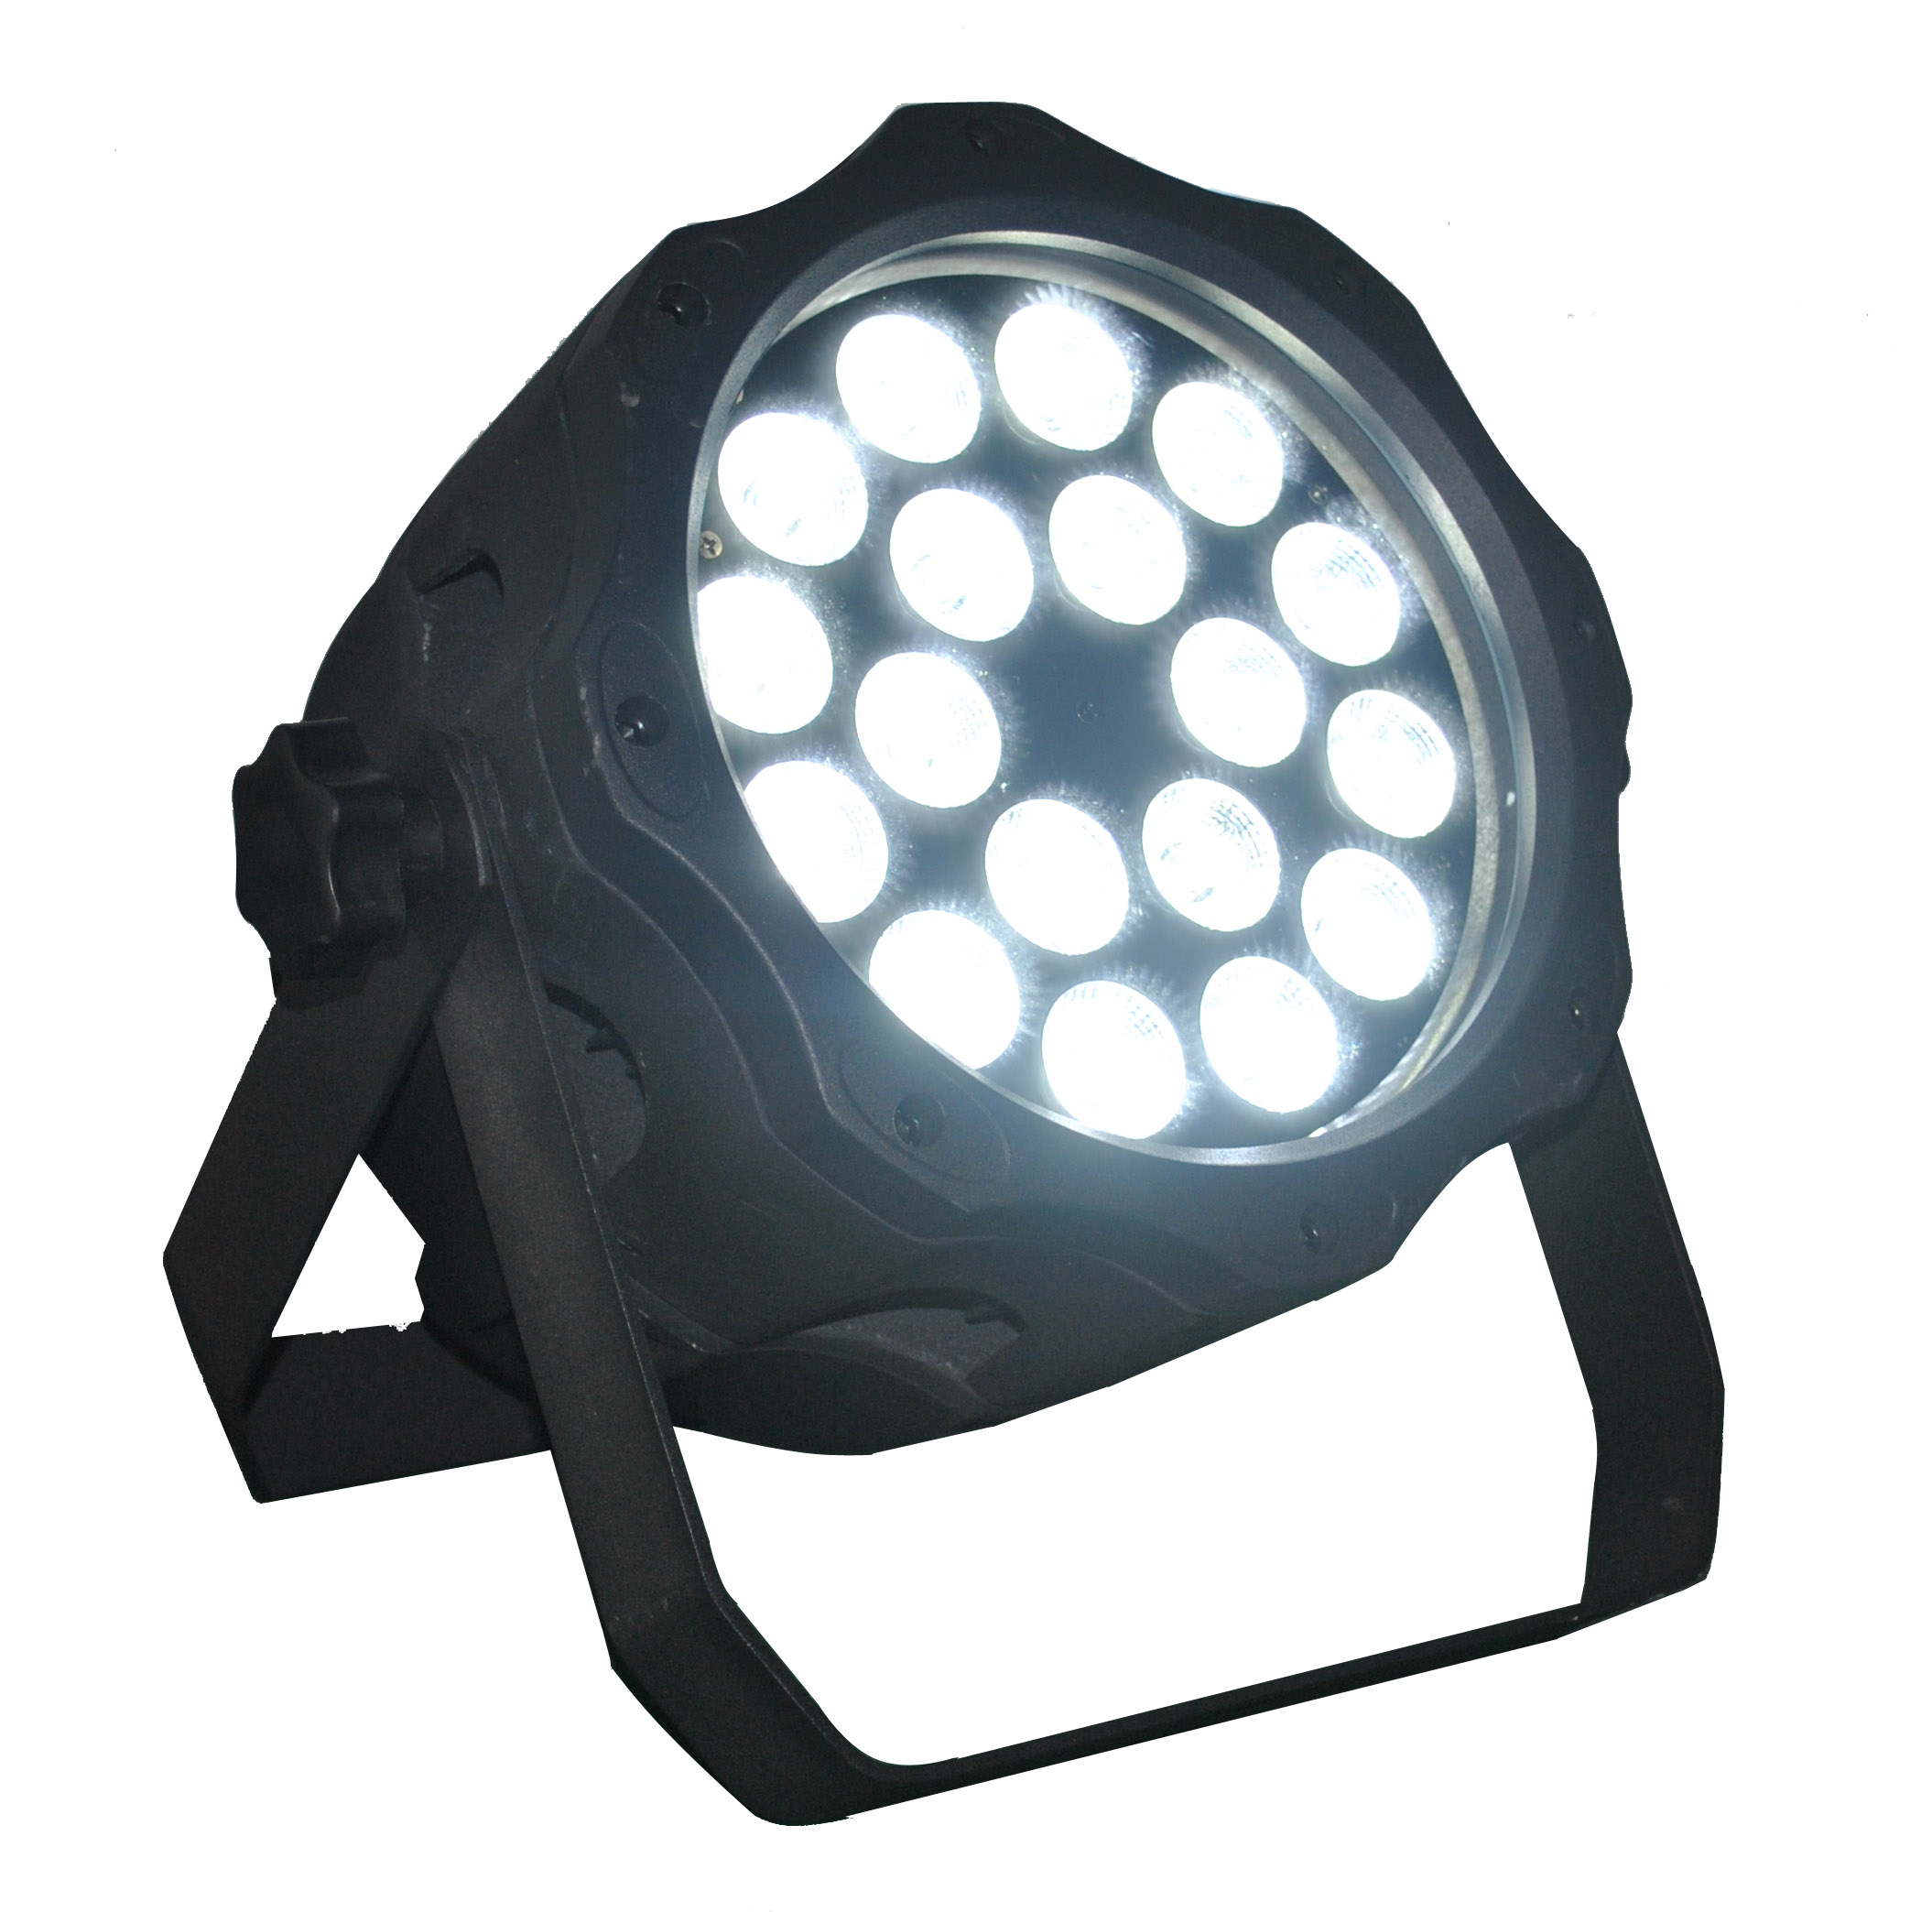 Outdoor 18X18W 6in1 Led Par Can Light HS-P64-1818Out - Led stage light - 2